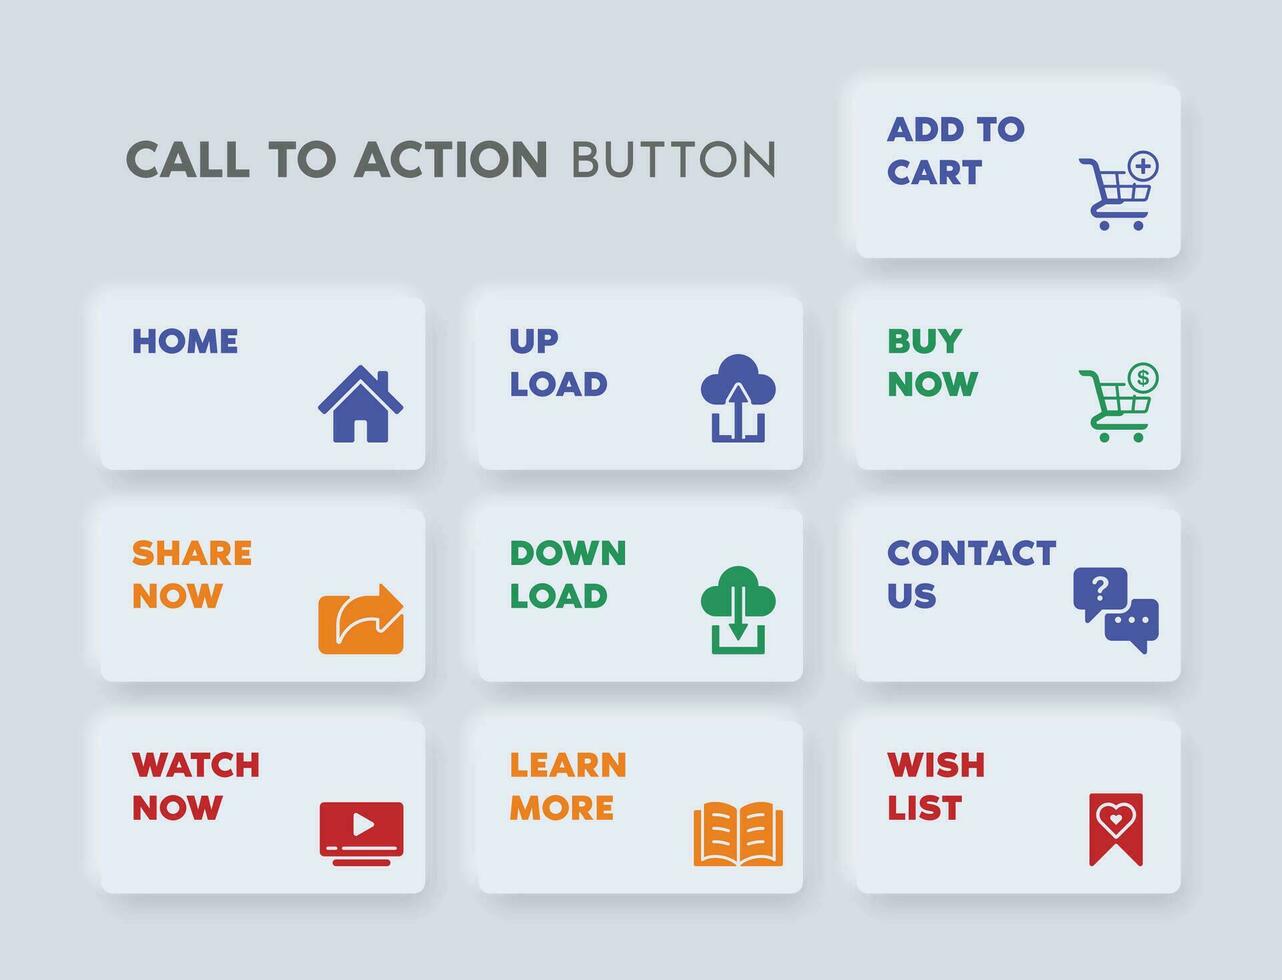 Web Button Design for CTA or Call to Action with Flat Design and Modern Style vector